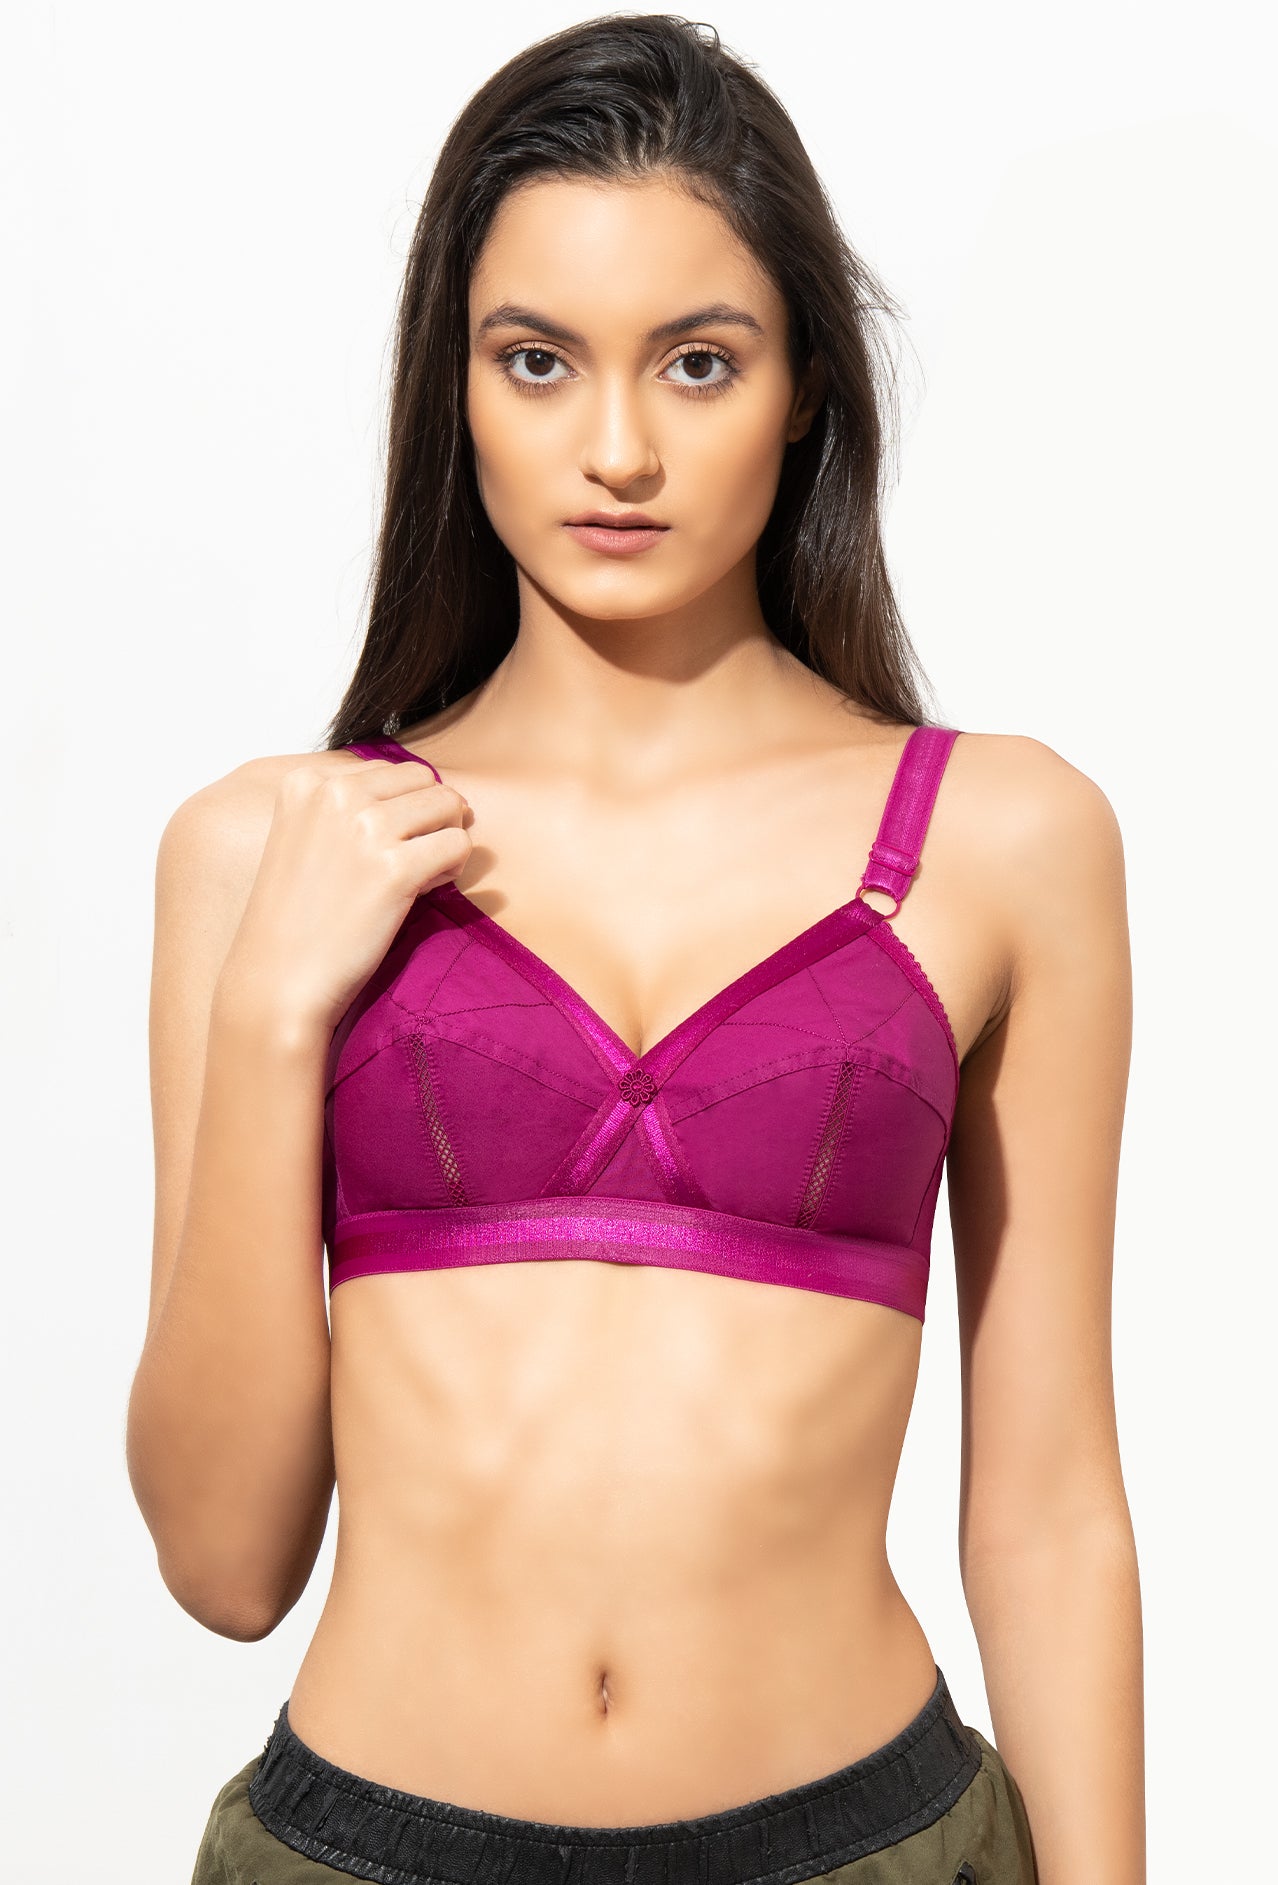 Buy Sona Women's Perfecto Full Cup Everyday Plus Size Cotton Bra Size 46H  at